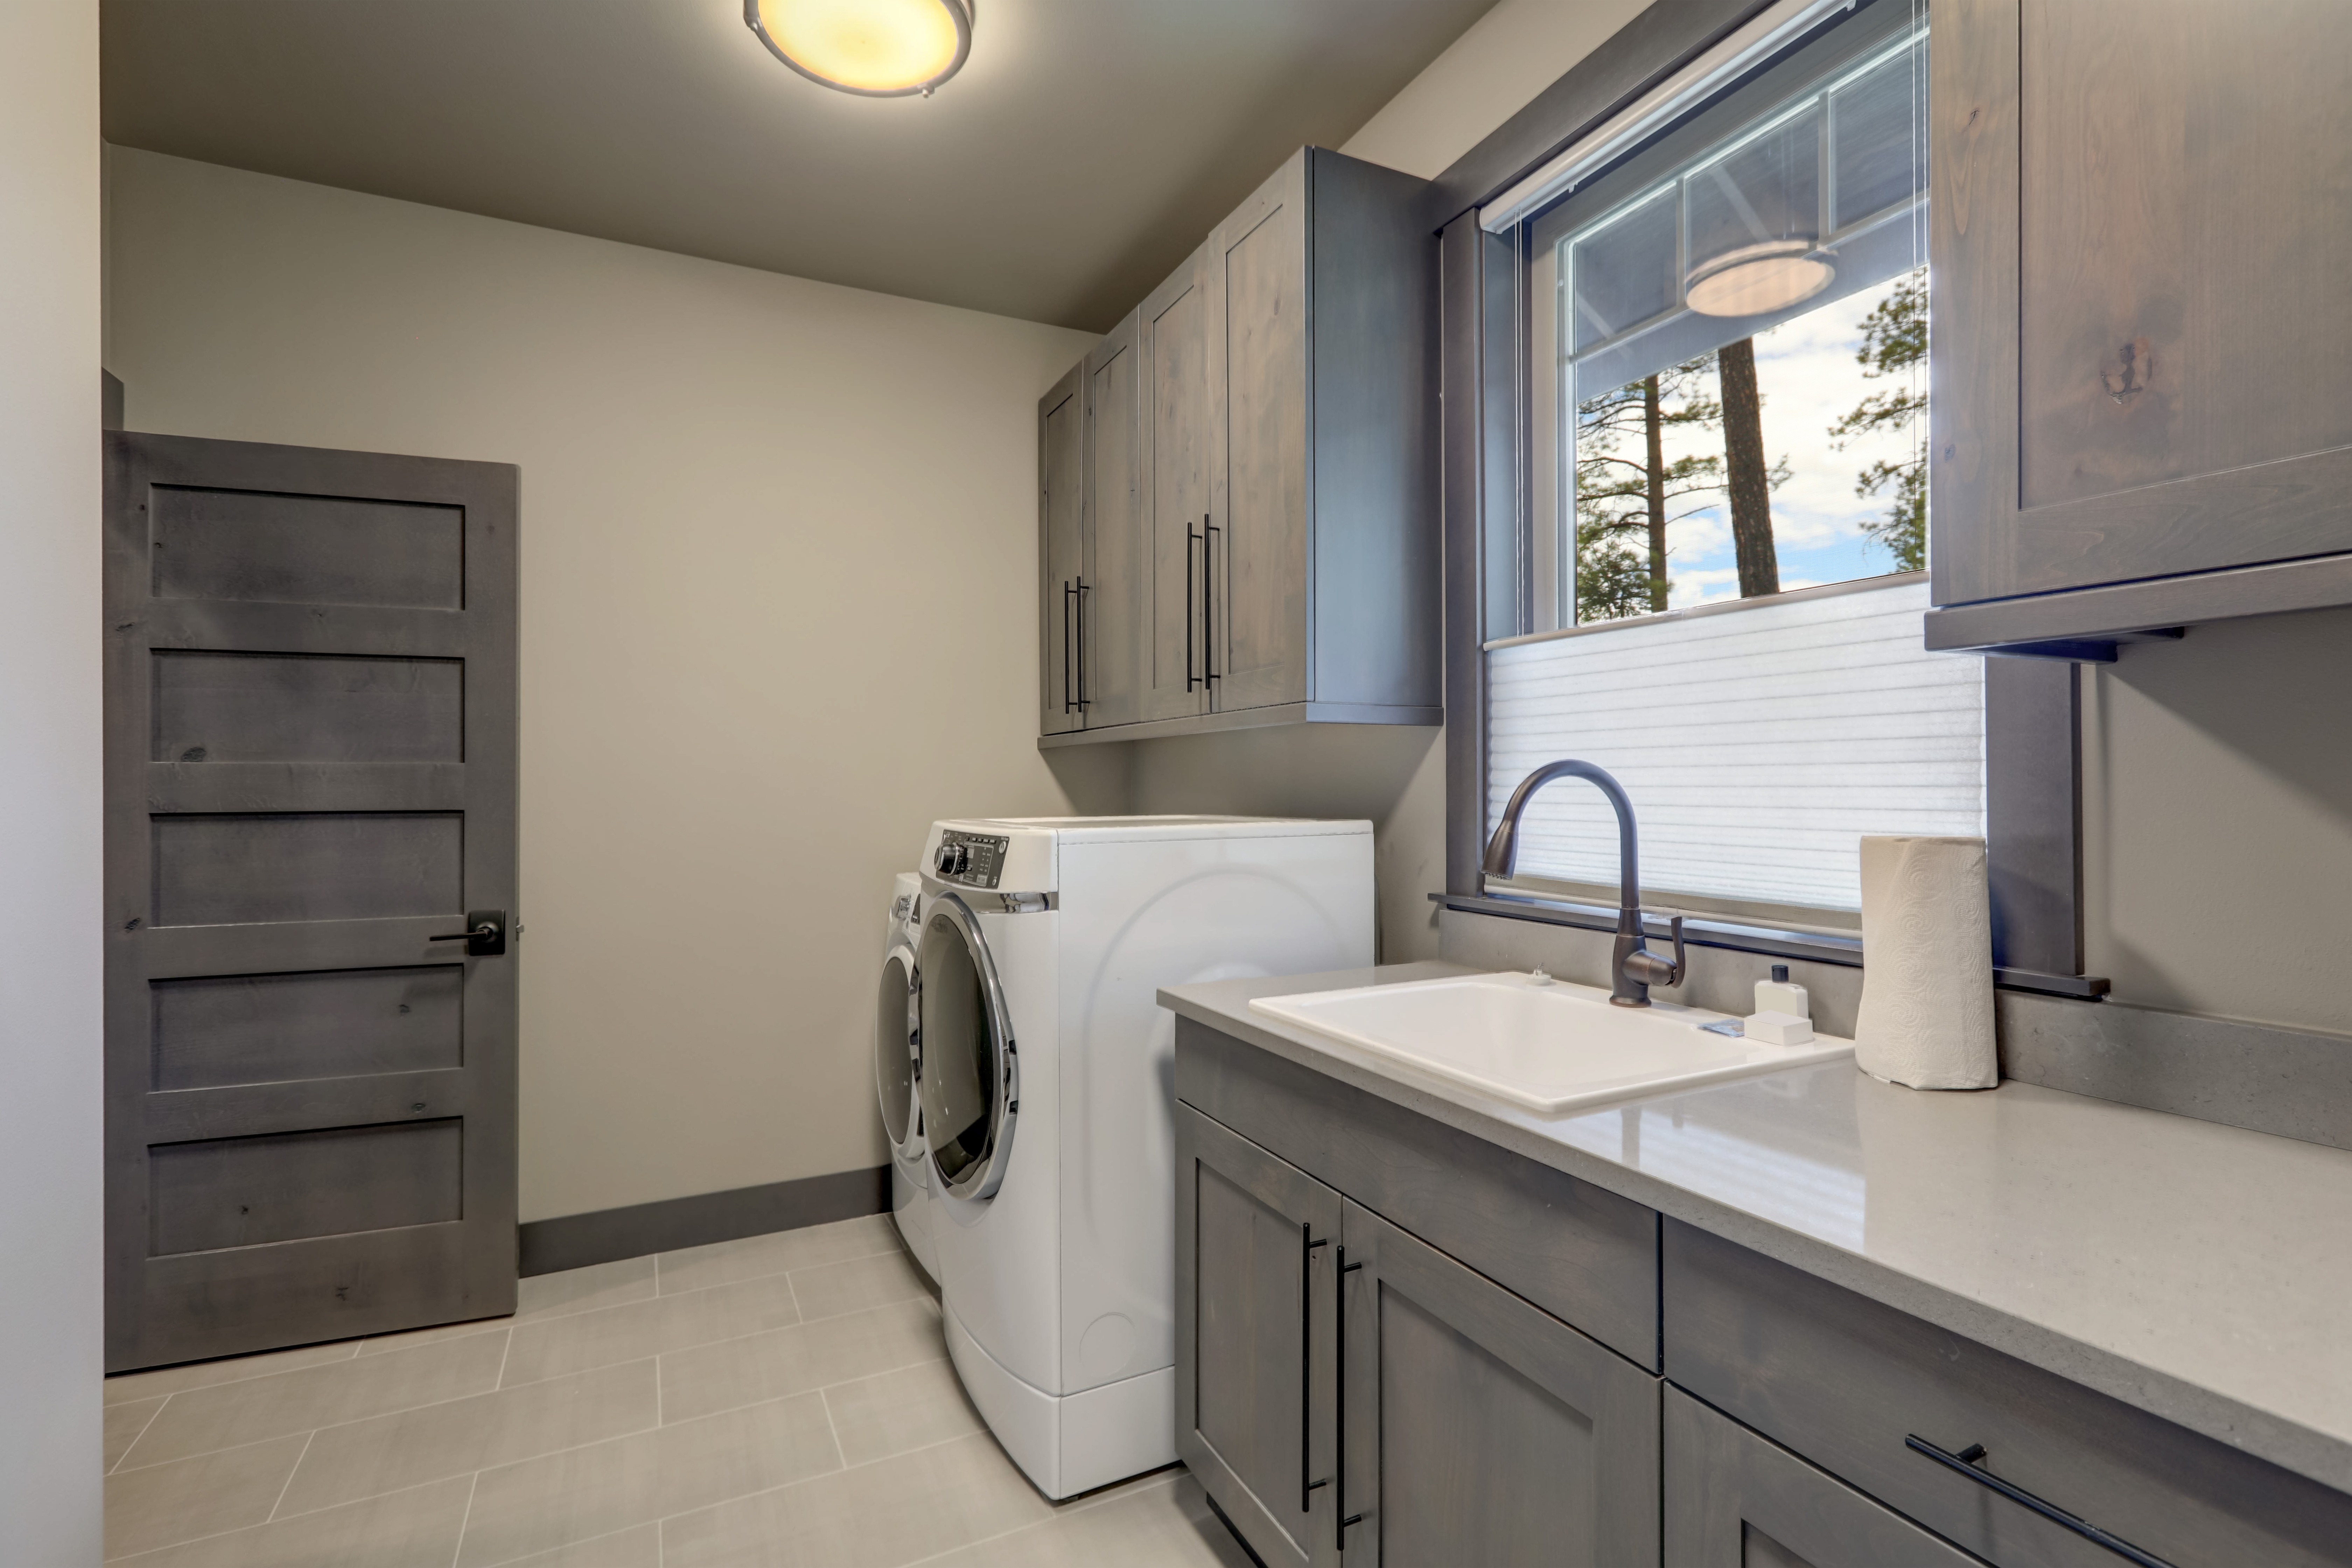 Beautiful laundry room with rish wooden doors and white washer and dryer | Pierce Carpet Mill Outlet